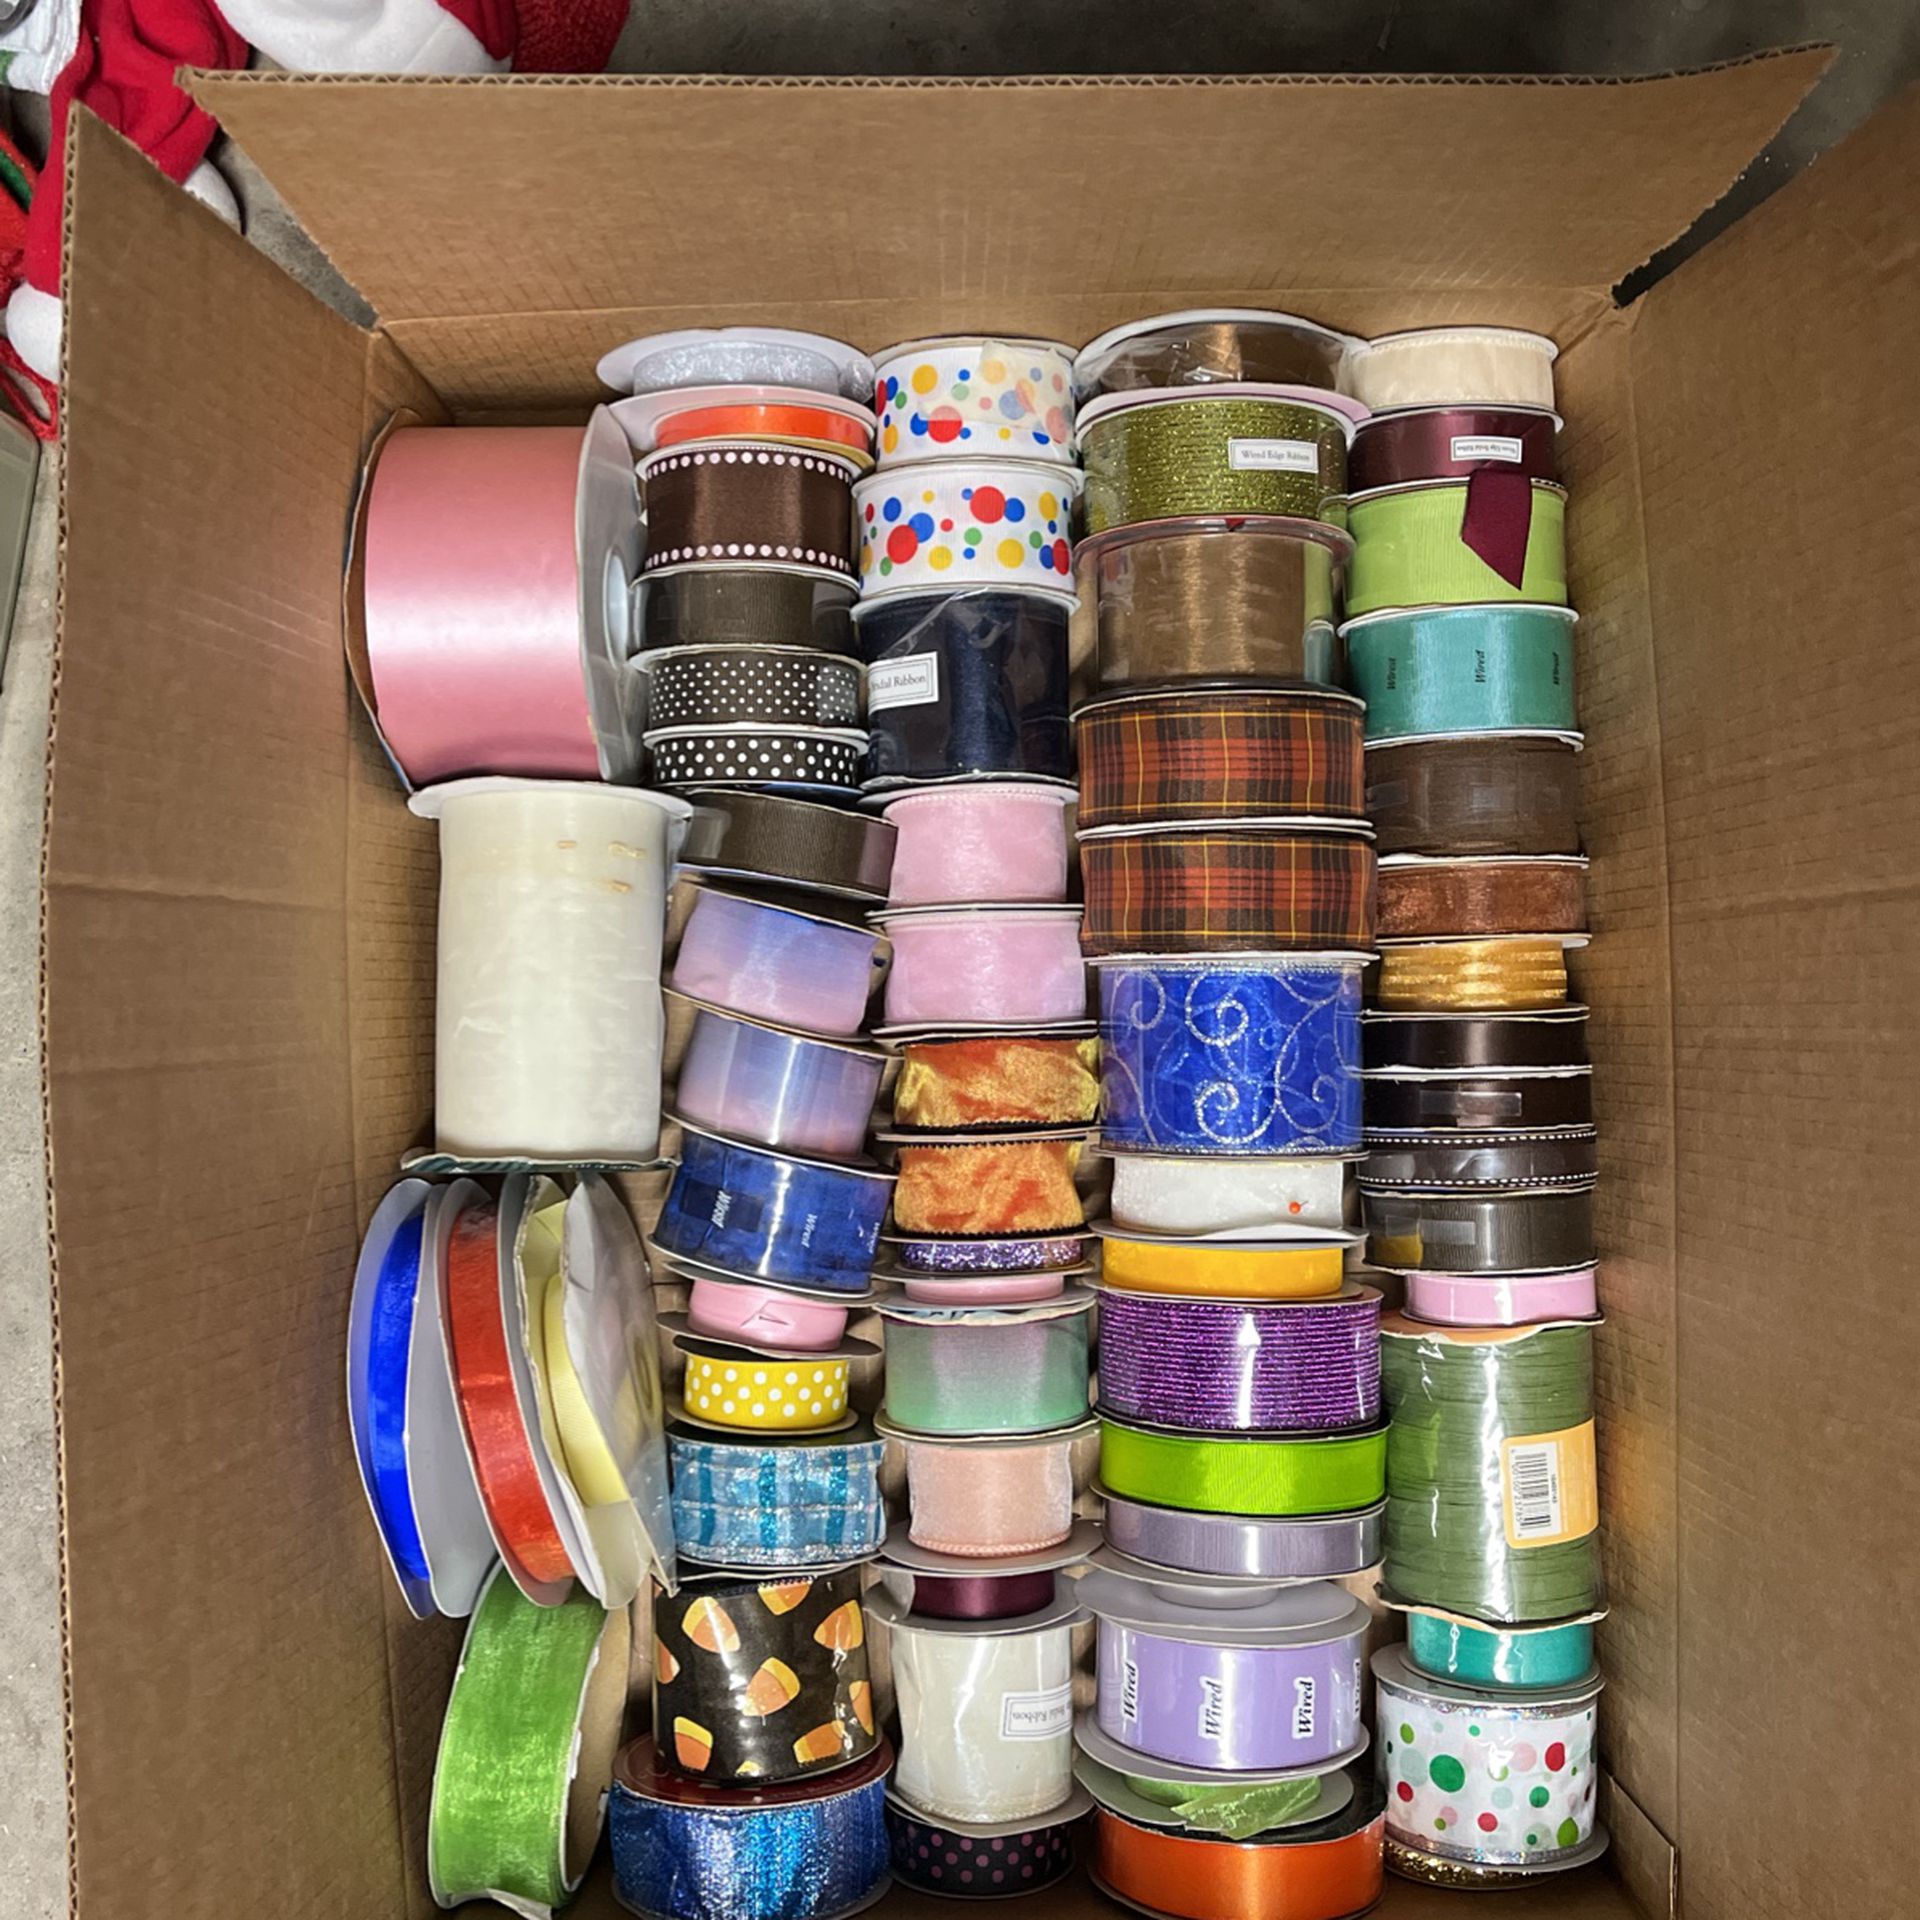 Box of Ribbon - All for $15 - 66 Spools - New & Opened